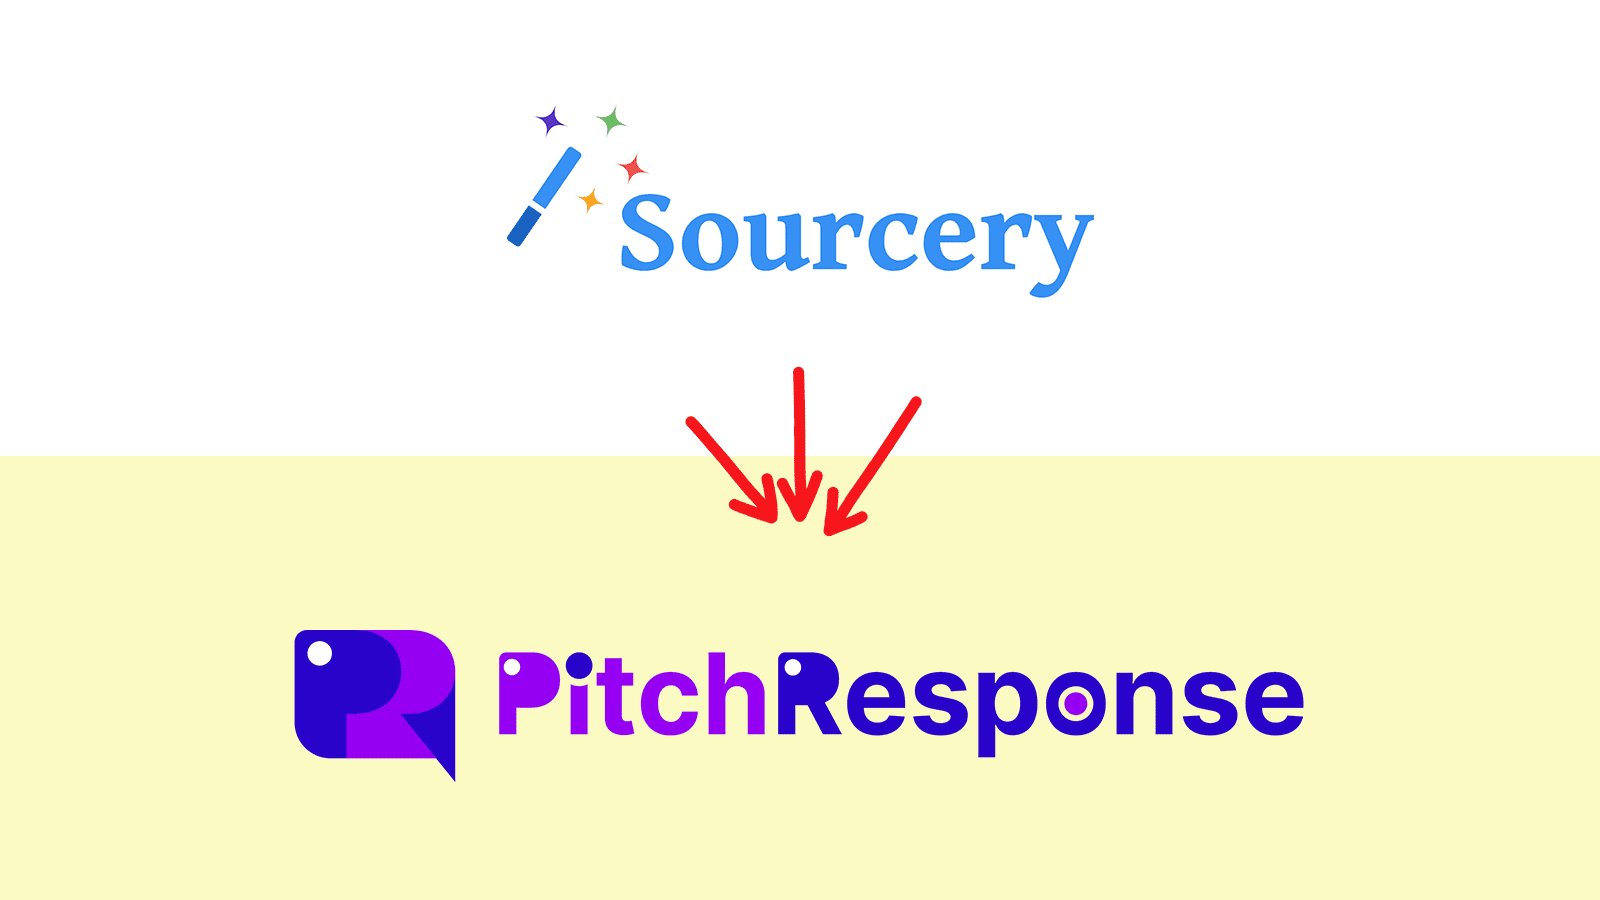 LinkSourcery is now PitchResponse